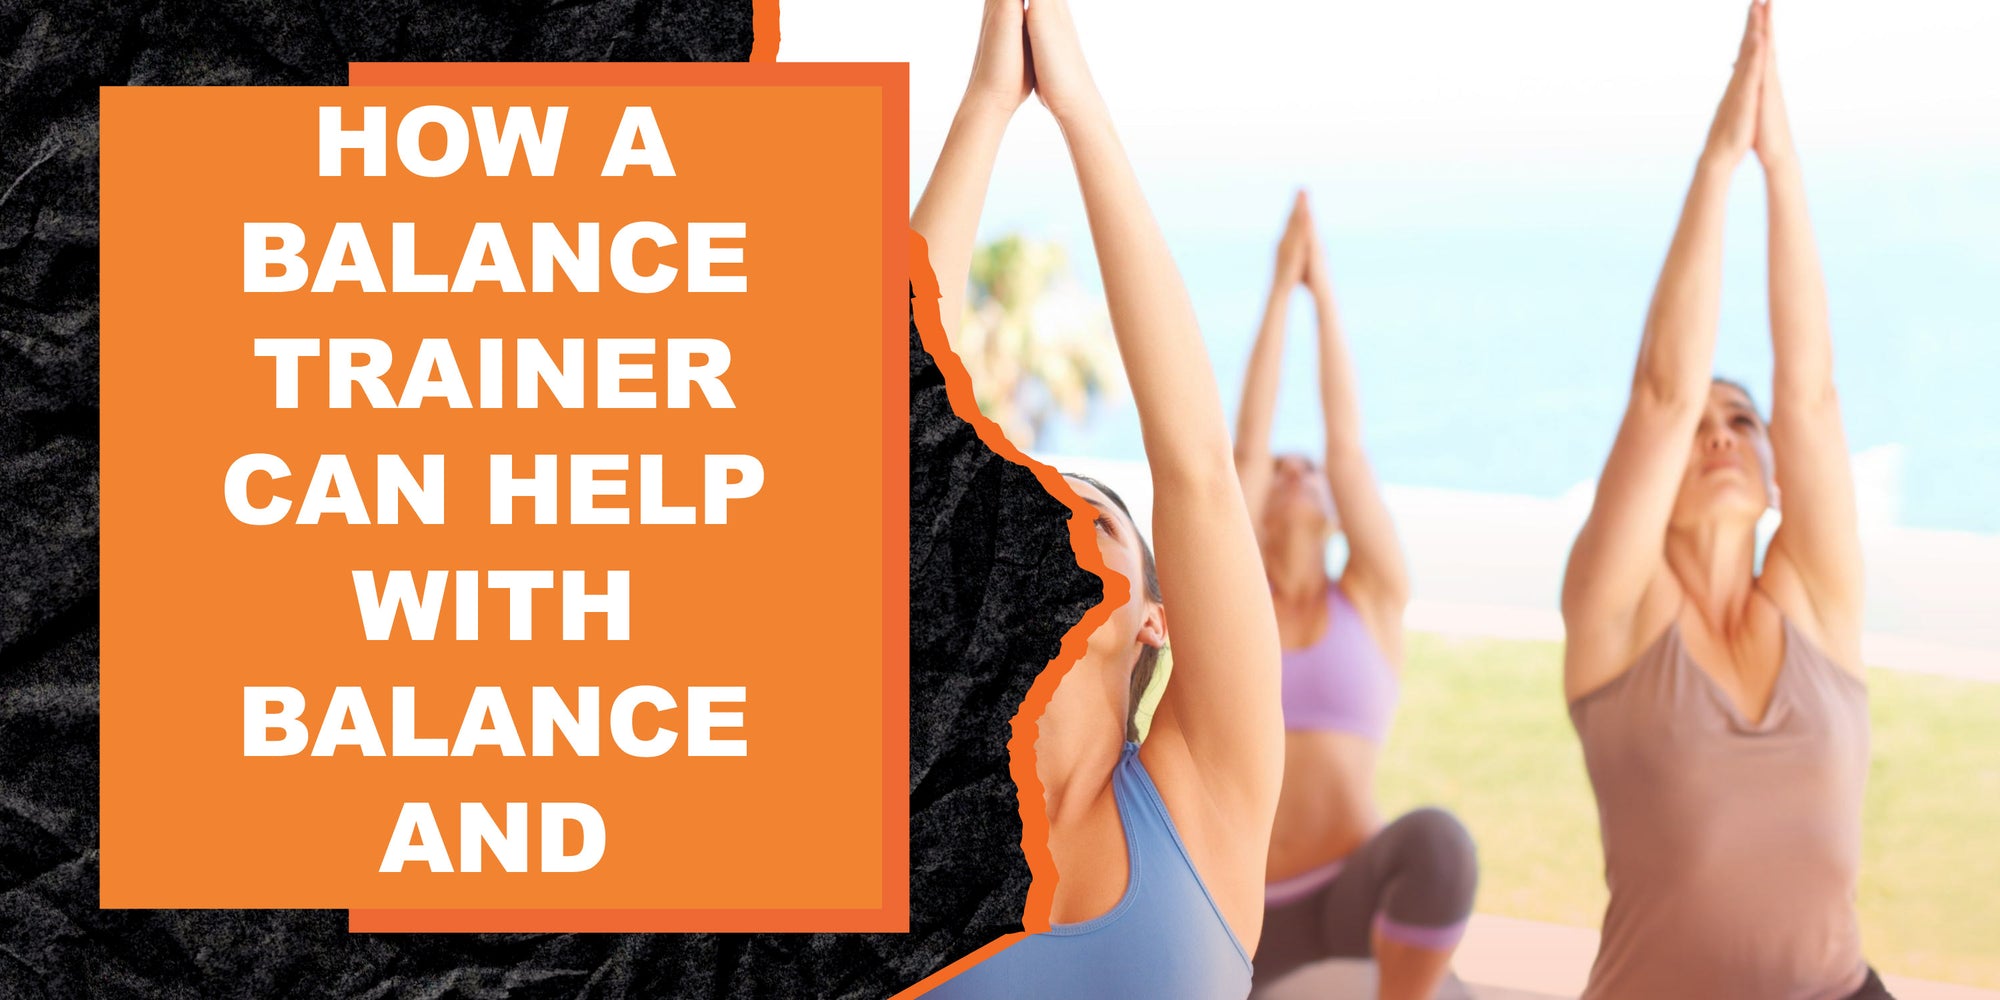 How a Balance Trainer Can Help With Balance and Mobility